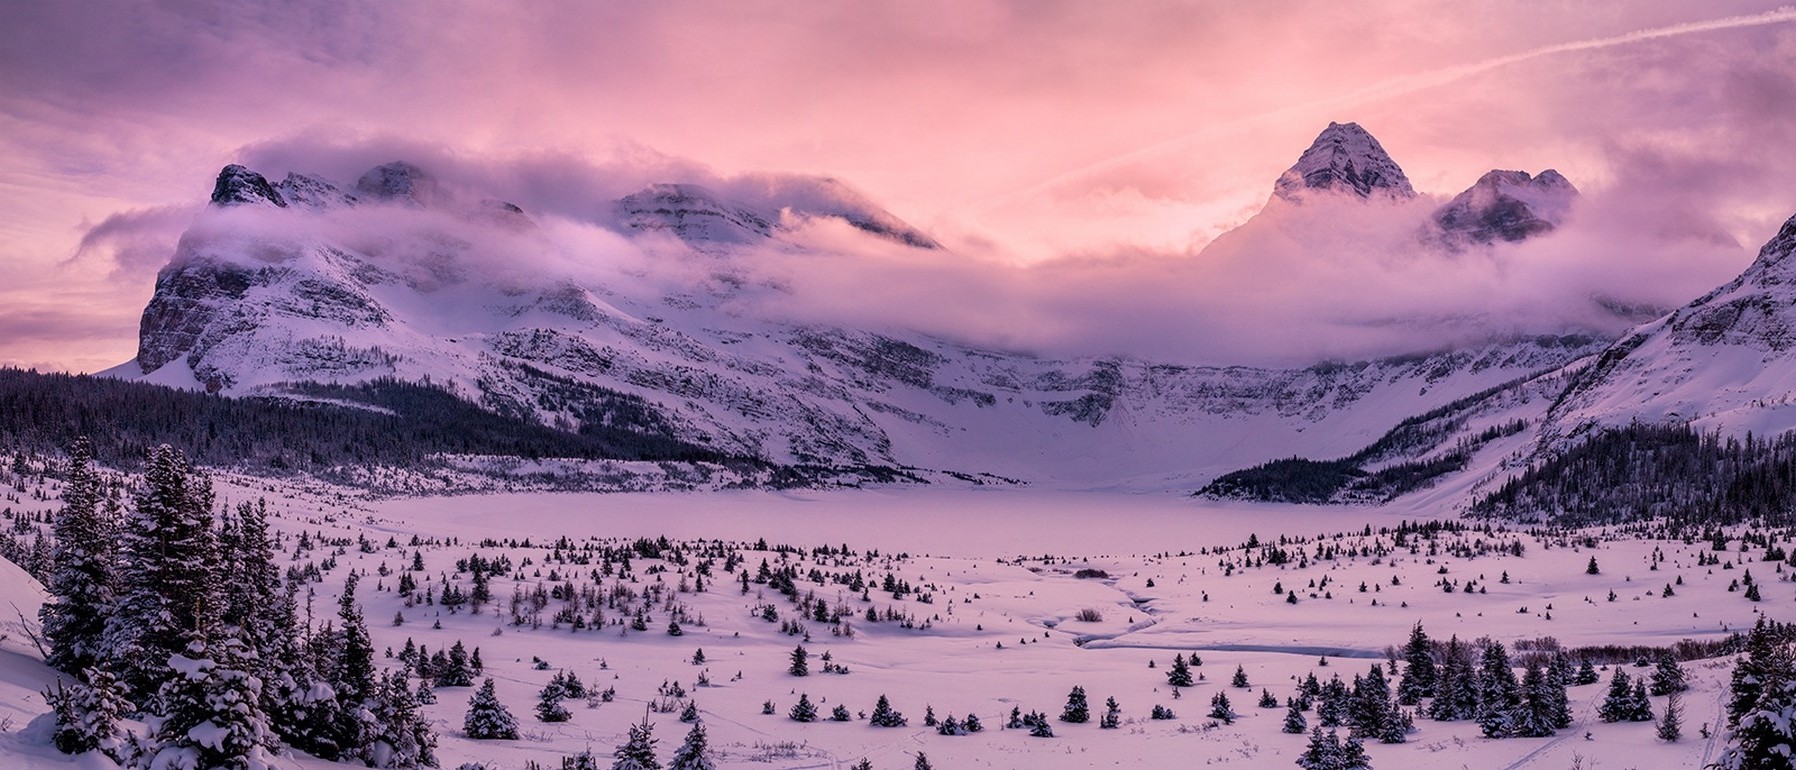 photography, Landscape, Nature, Mountains, Panorama, Winter, Forest, Snow, Pink, Clouds, Sunset, Cold, British Columbia, Canada Wallpaper HD / Desktop and Mobile Background